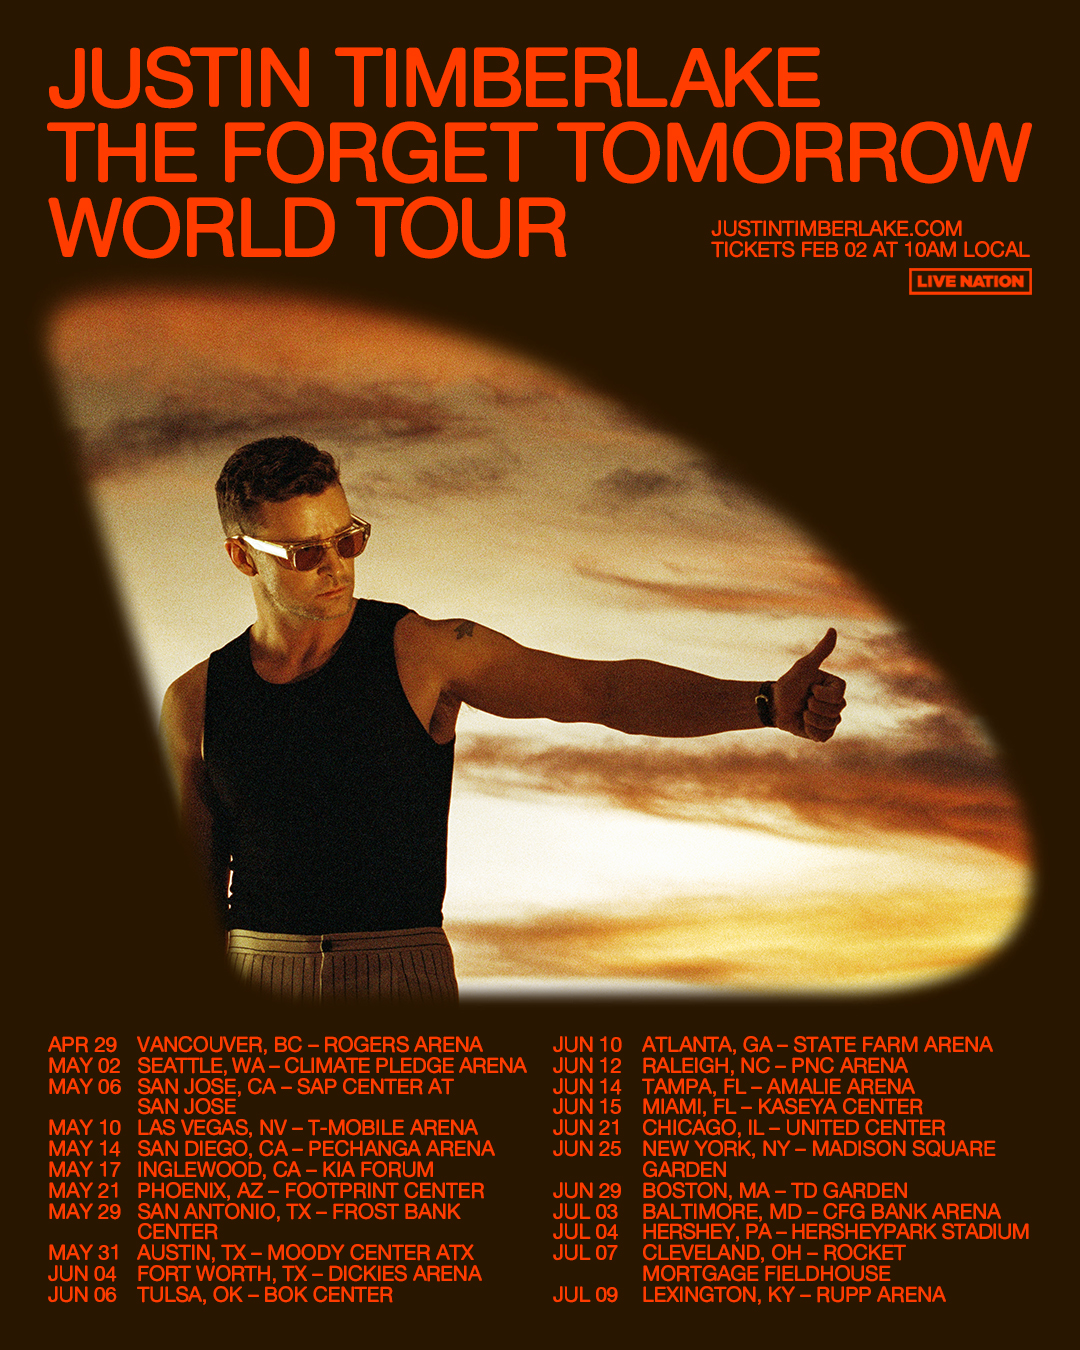 Justin Timberlake - The Forget Tomorrow World Tour al Madison Square Garden Tickets